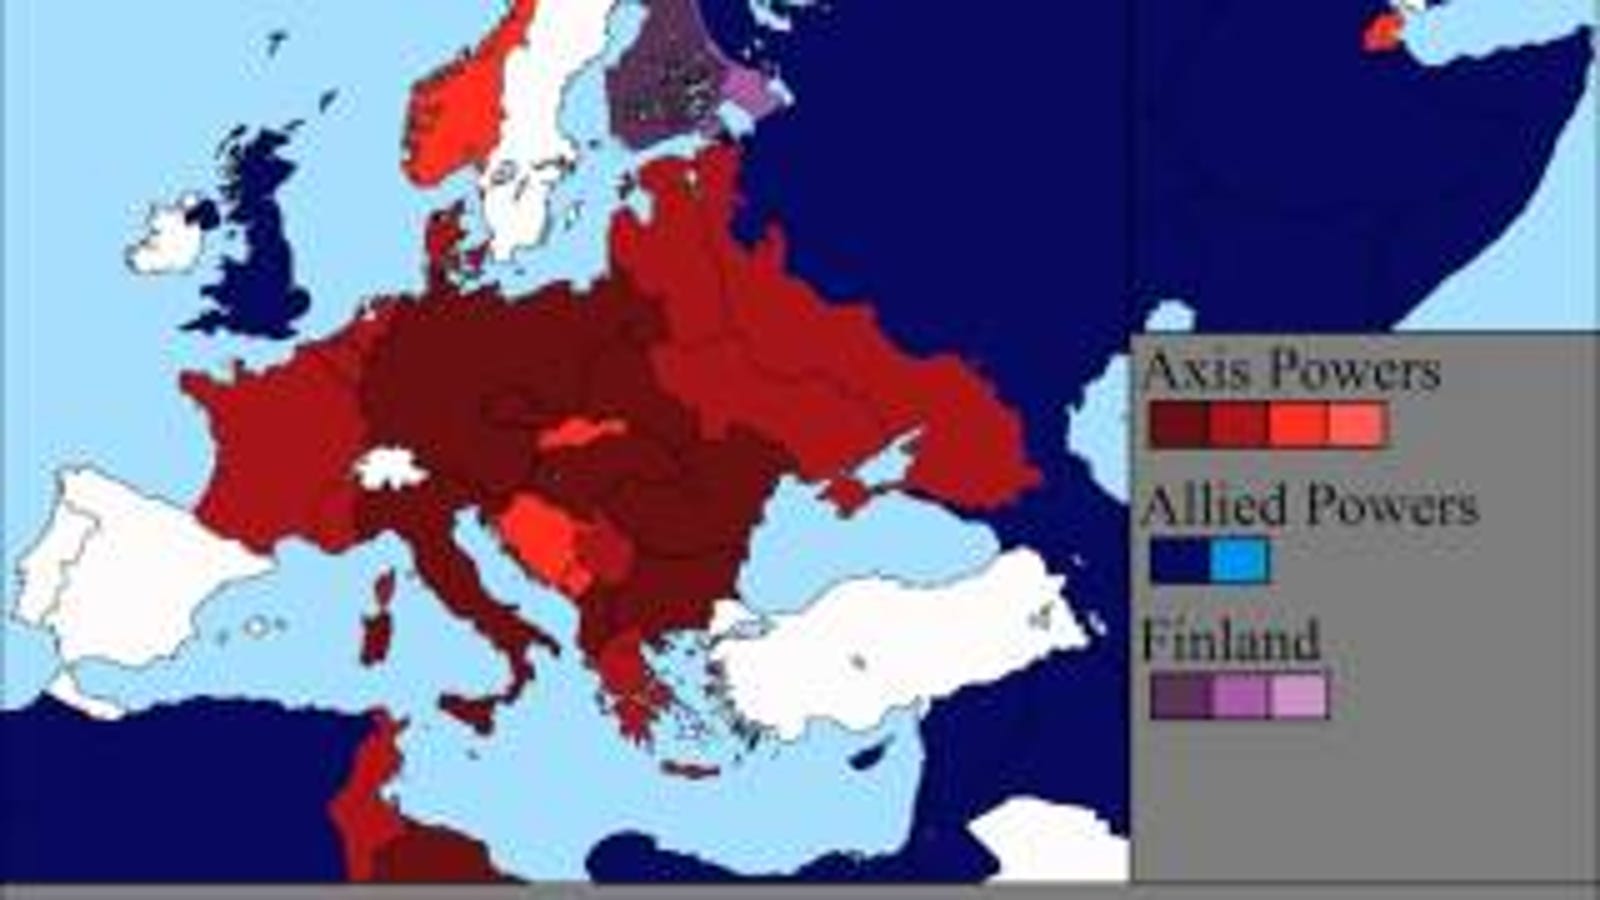 Watch The Second World War Unfold Over Europe In 7 Minutes